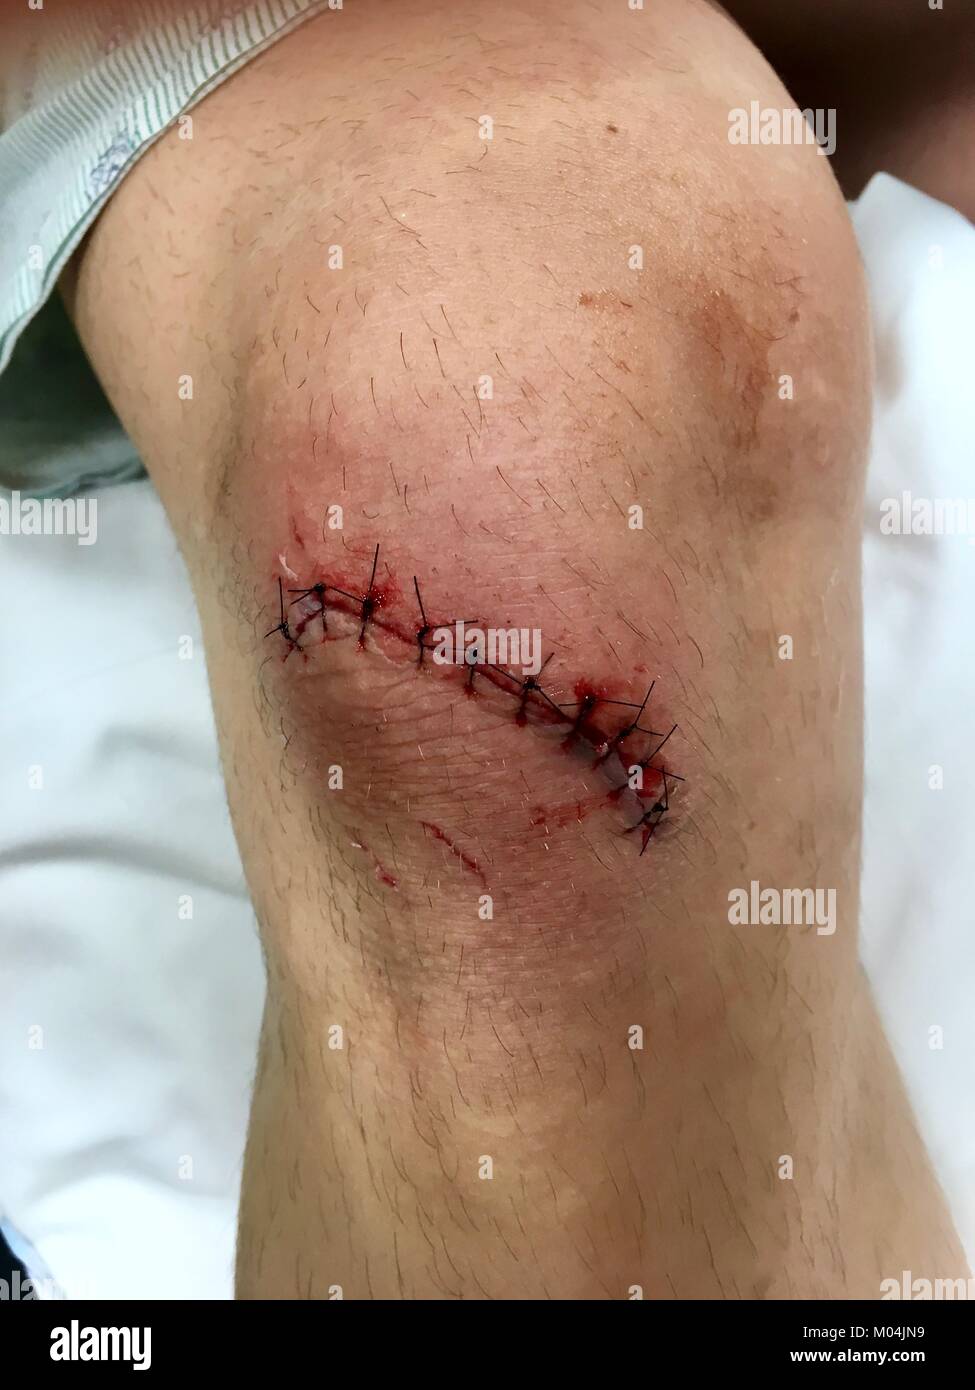 Knee laceration with stitches Stock Photo